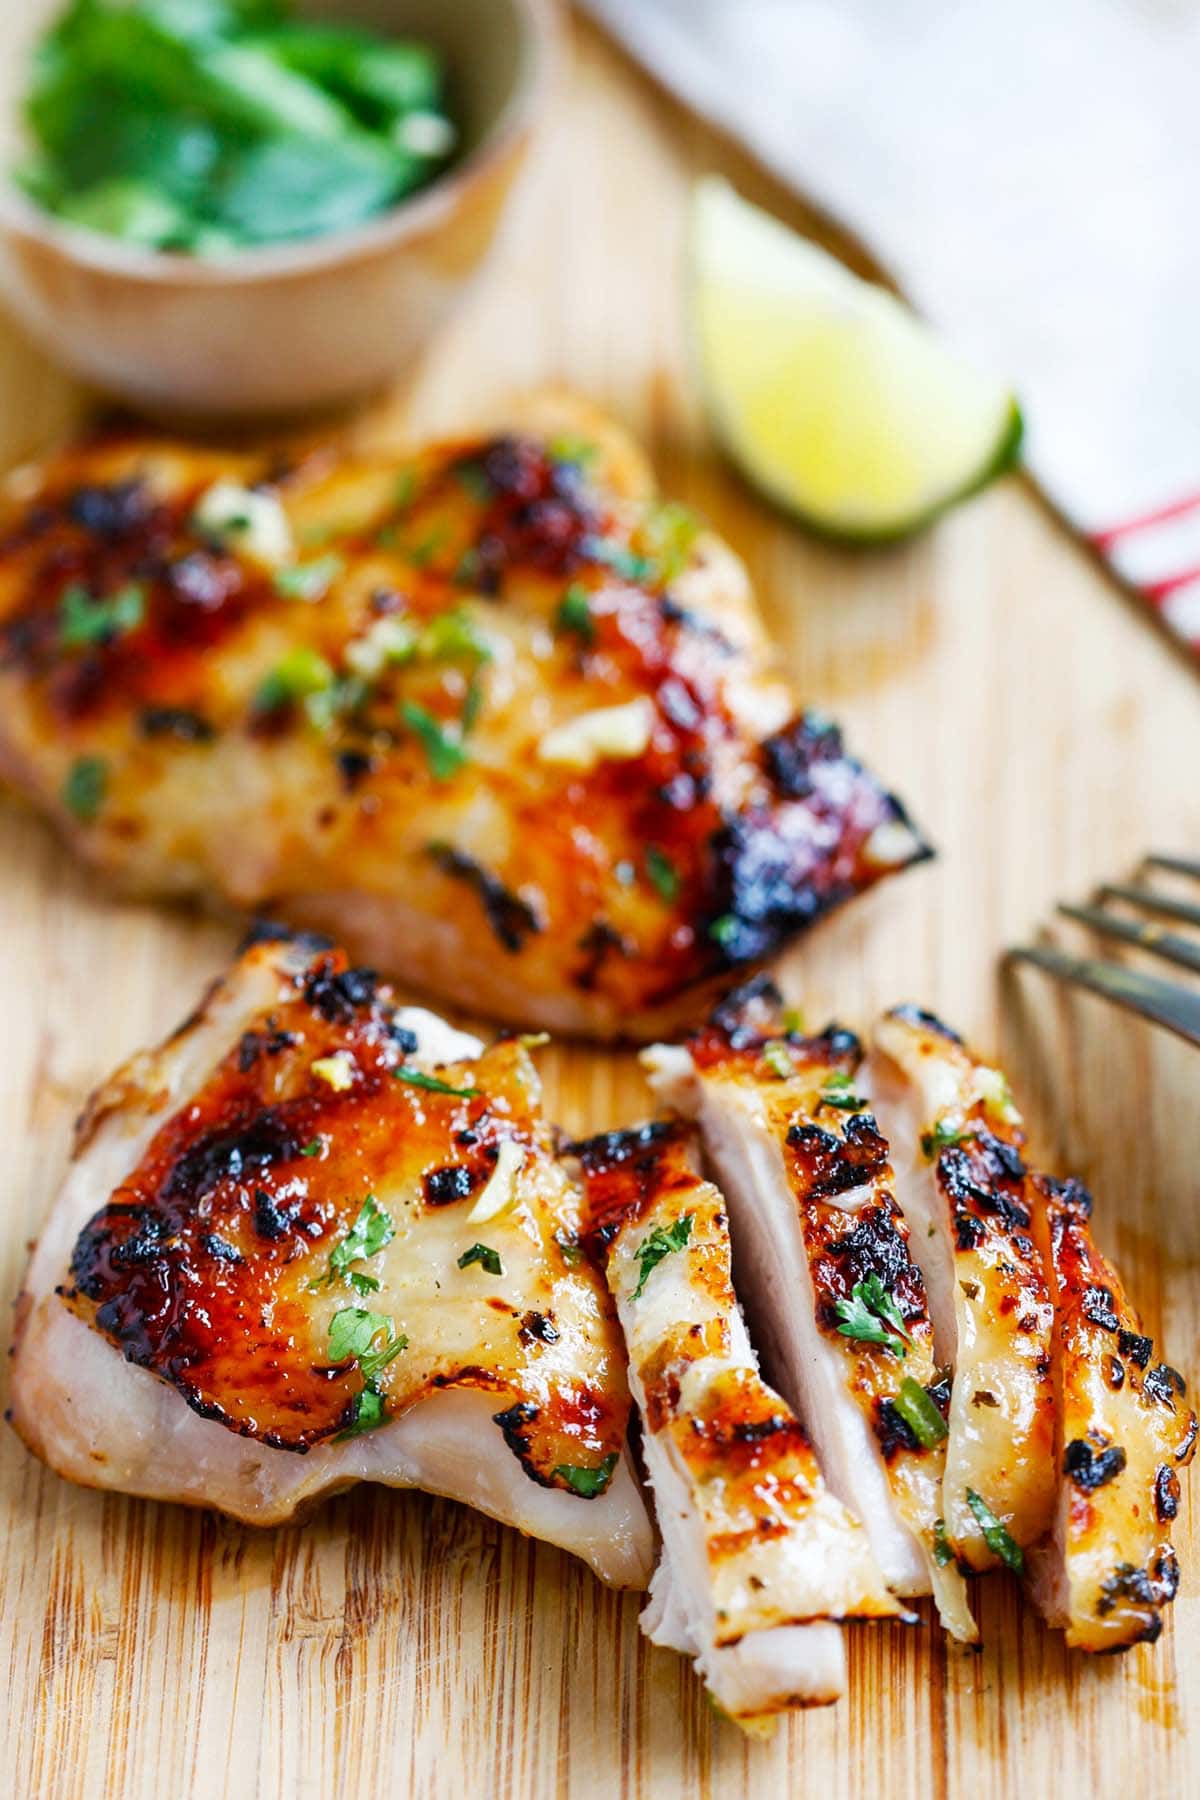 Chili lime chicken - moist and delicious chicken marinated with chili and lime and grill to perfection. 